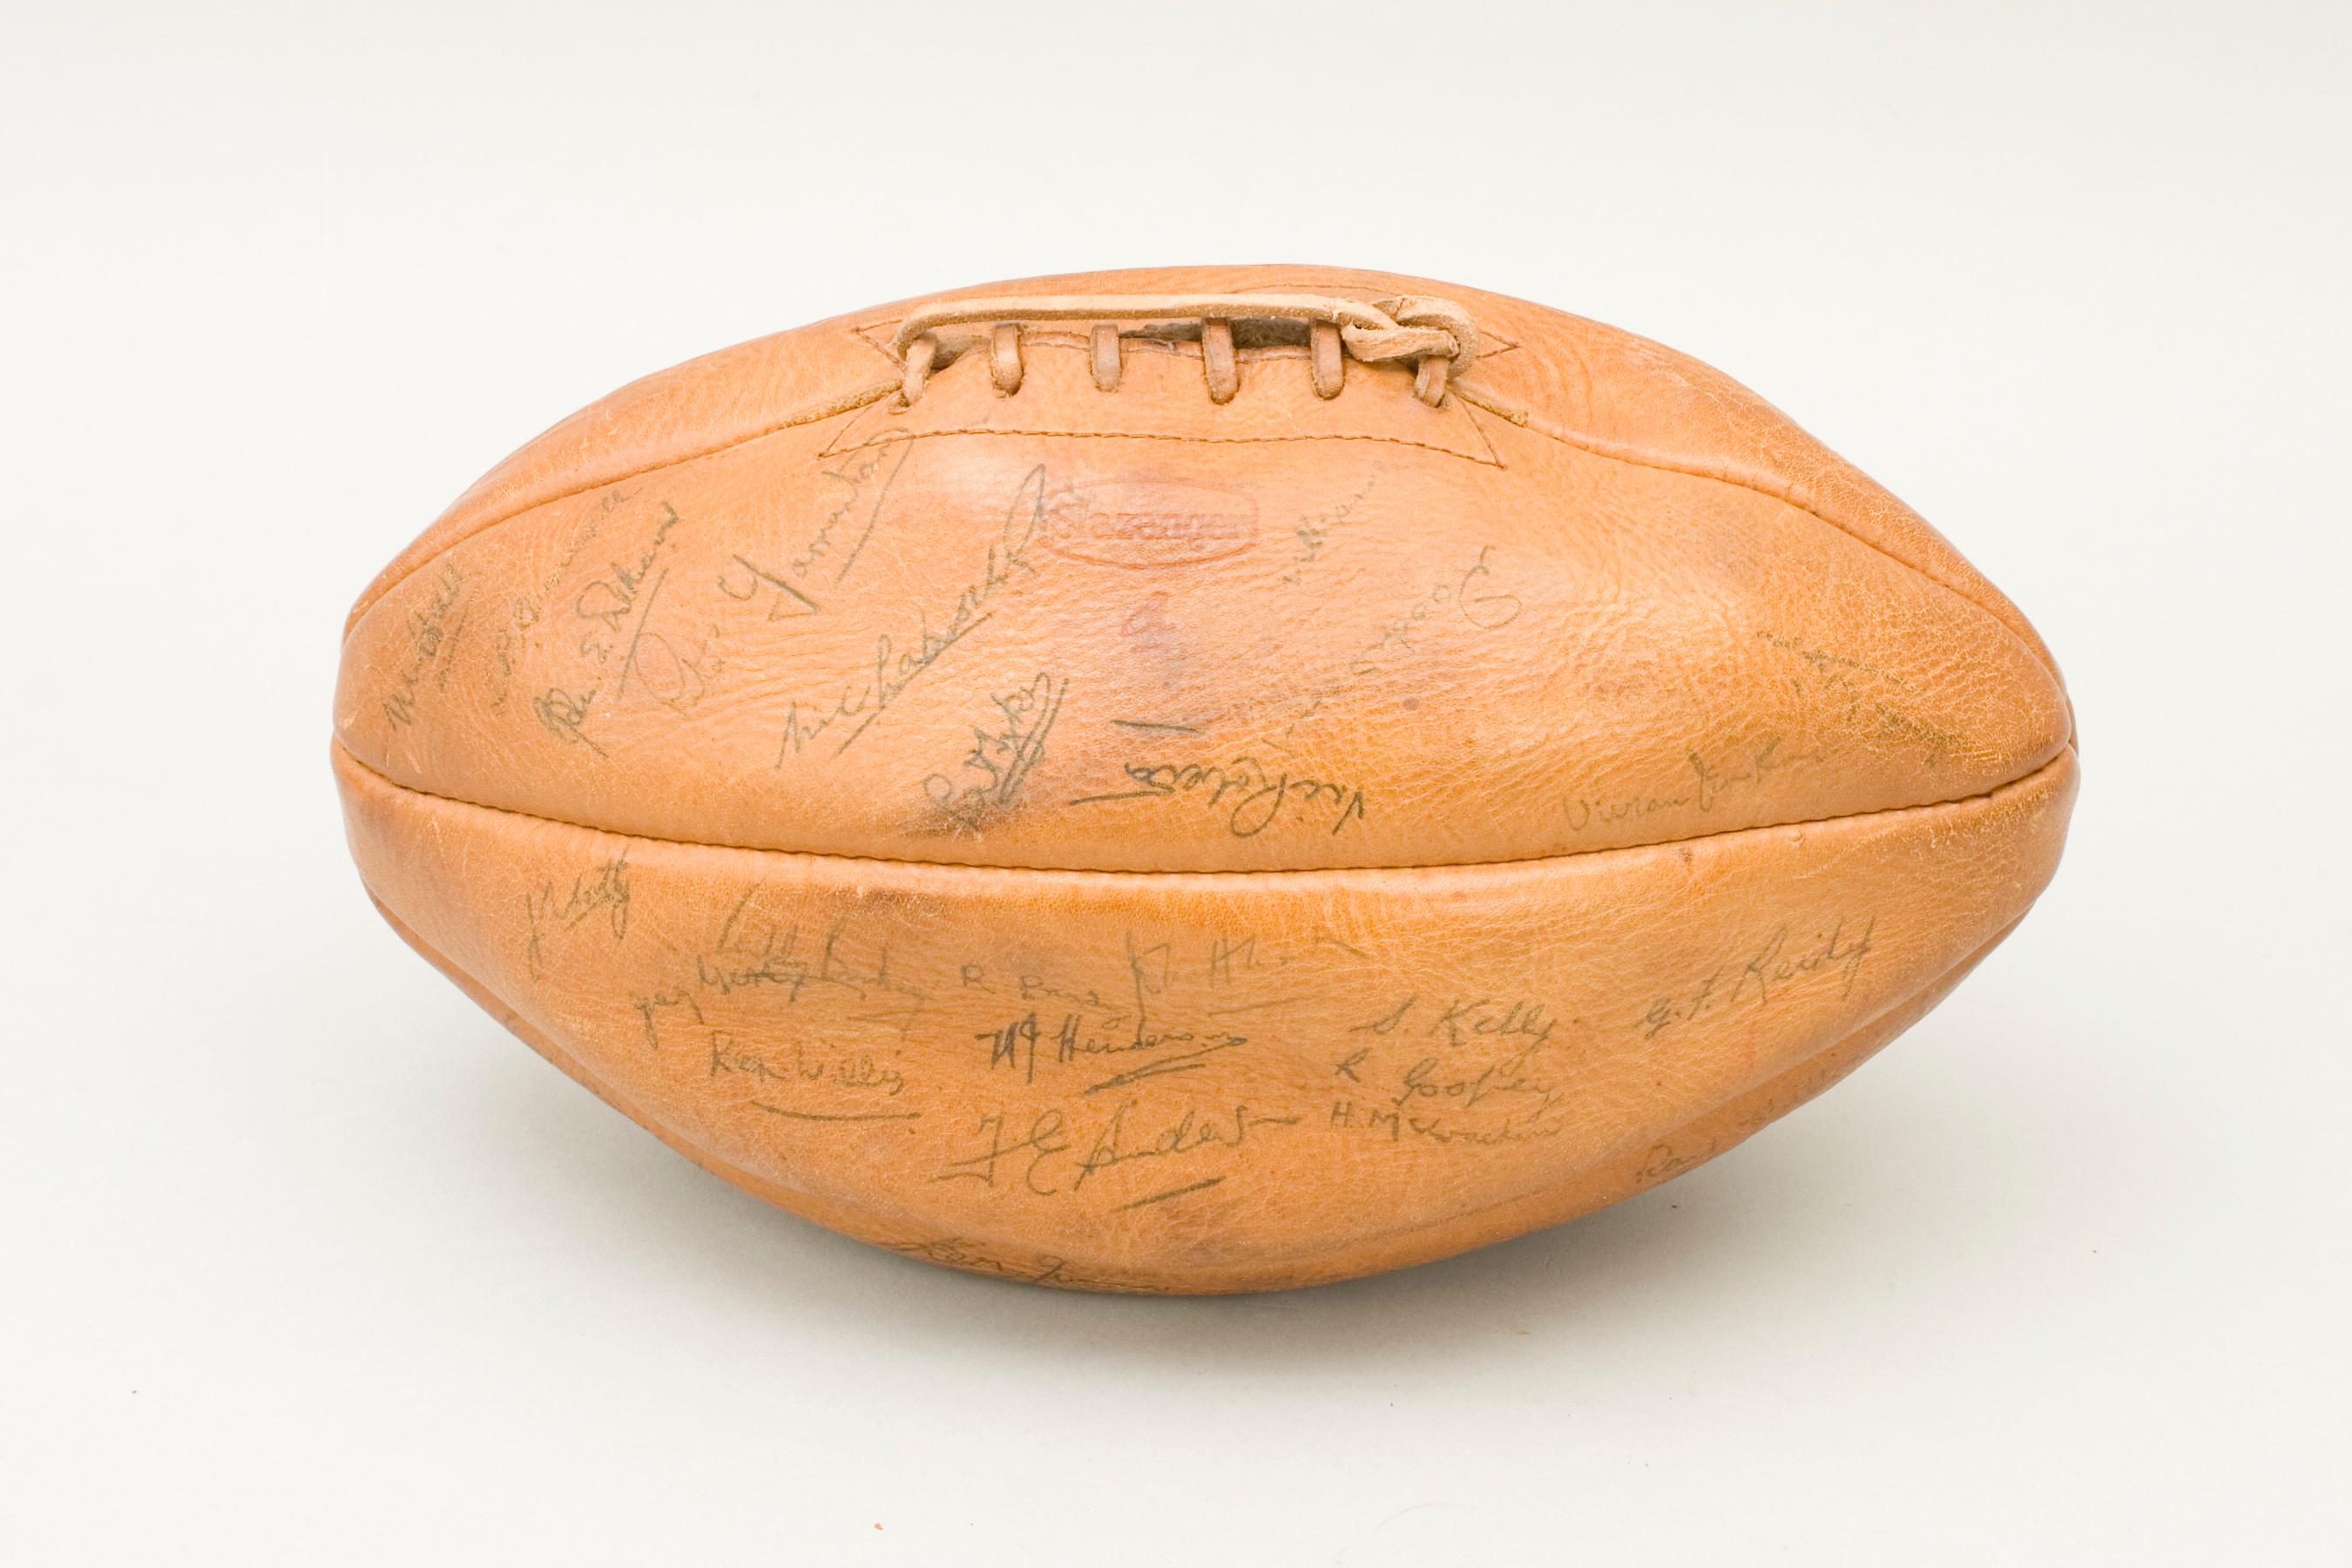 Signed Sykes perfection rugby ball, 1954 Five Nations.
A great looking traditional leather rugby ball marked Slazenger, Sykes Perfection. The ball with a lace-up slit to the top and made from six leather panels. The ball is with good color and is